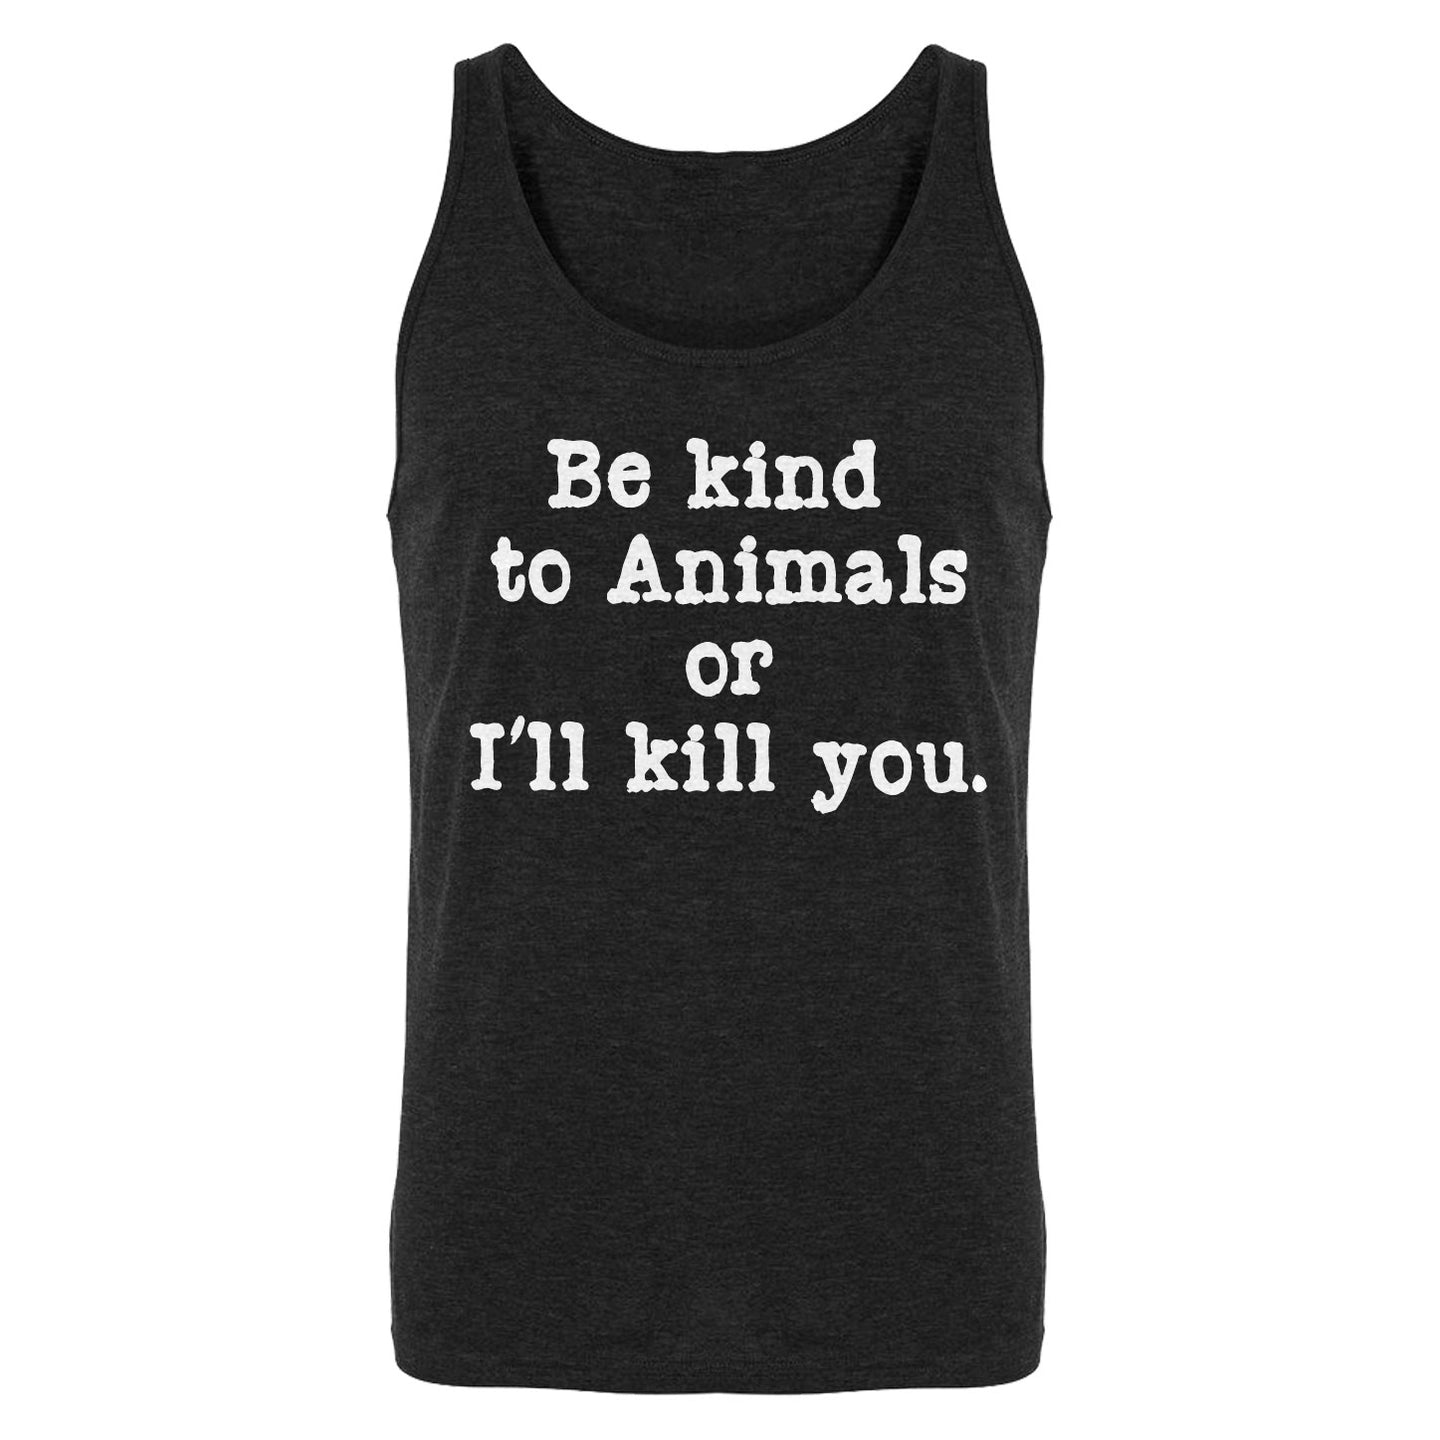 Tank Be Kind to Animals Mens Jersey Tank Top